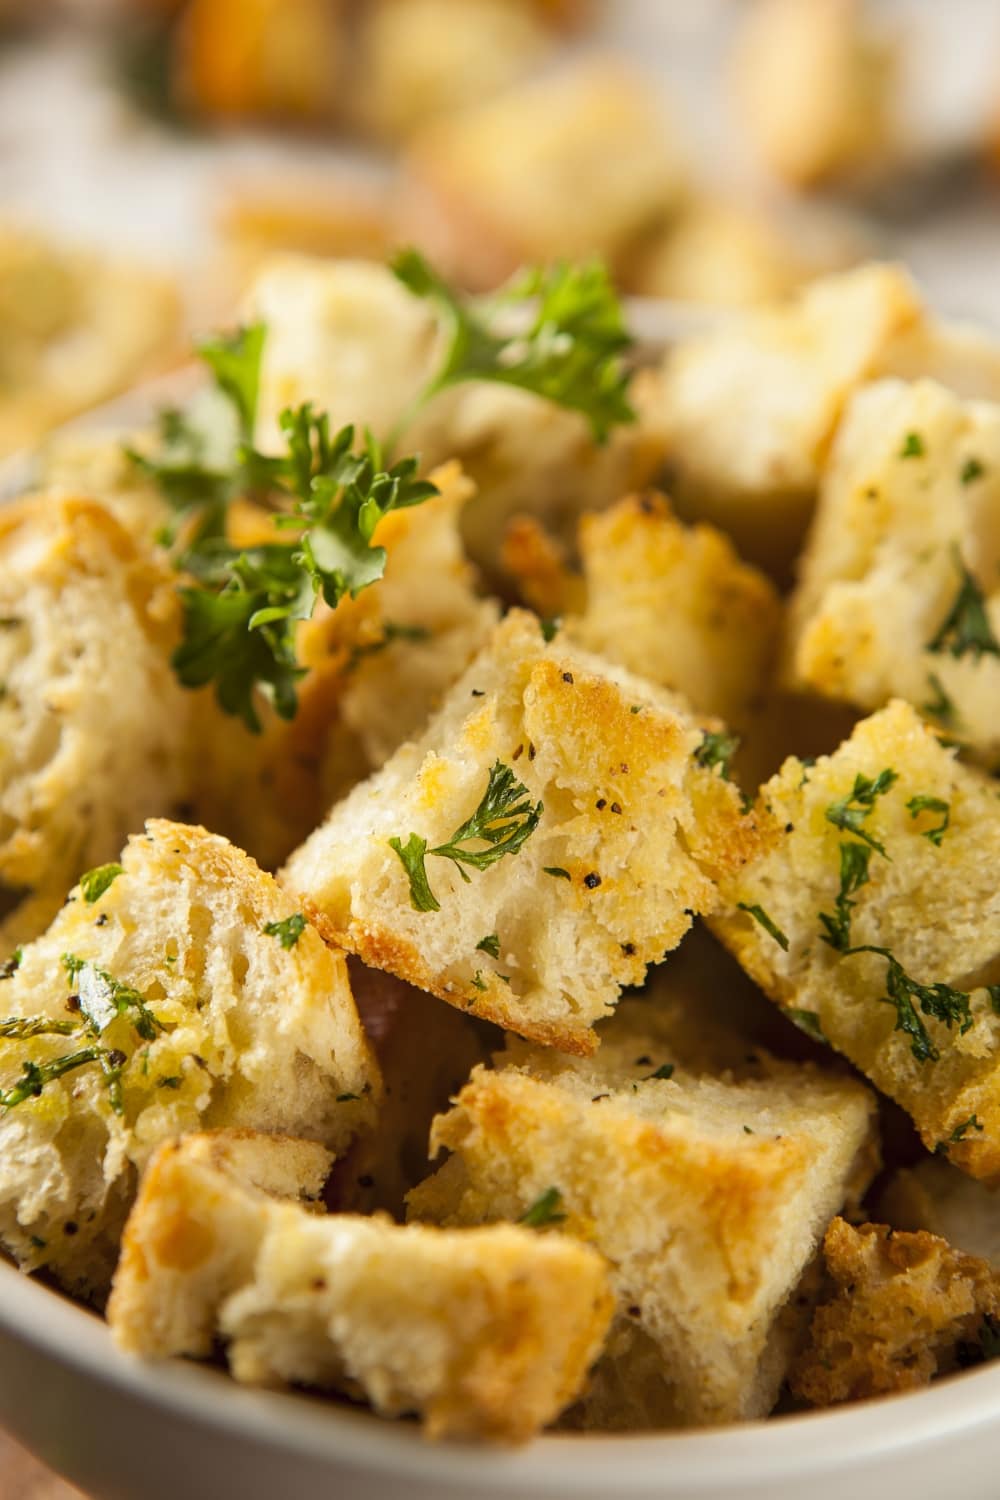 Homemade Croutons in a Bowl